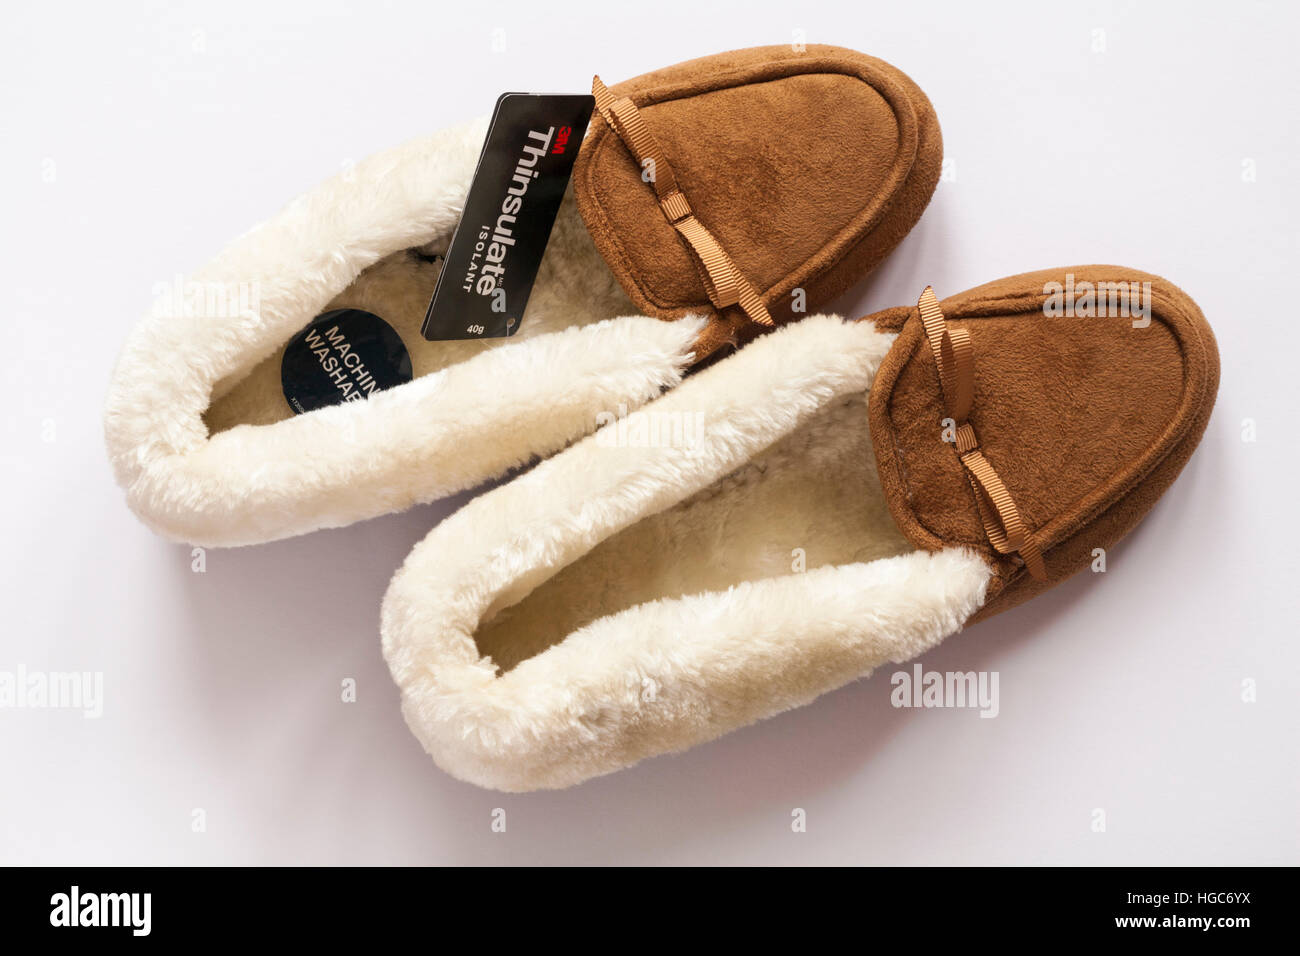 3m thinsulate slippers